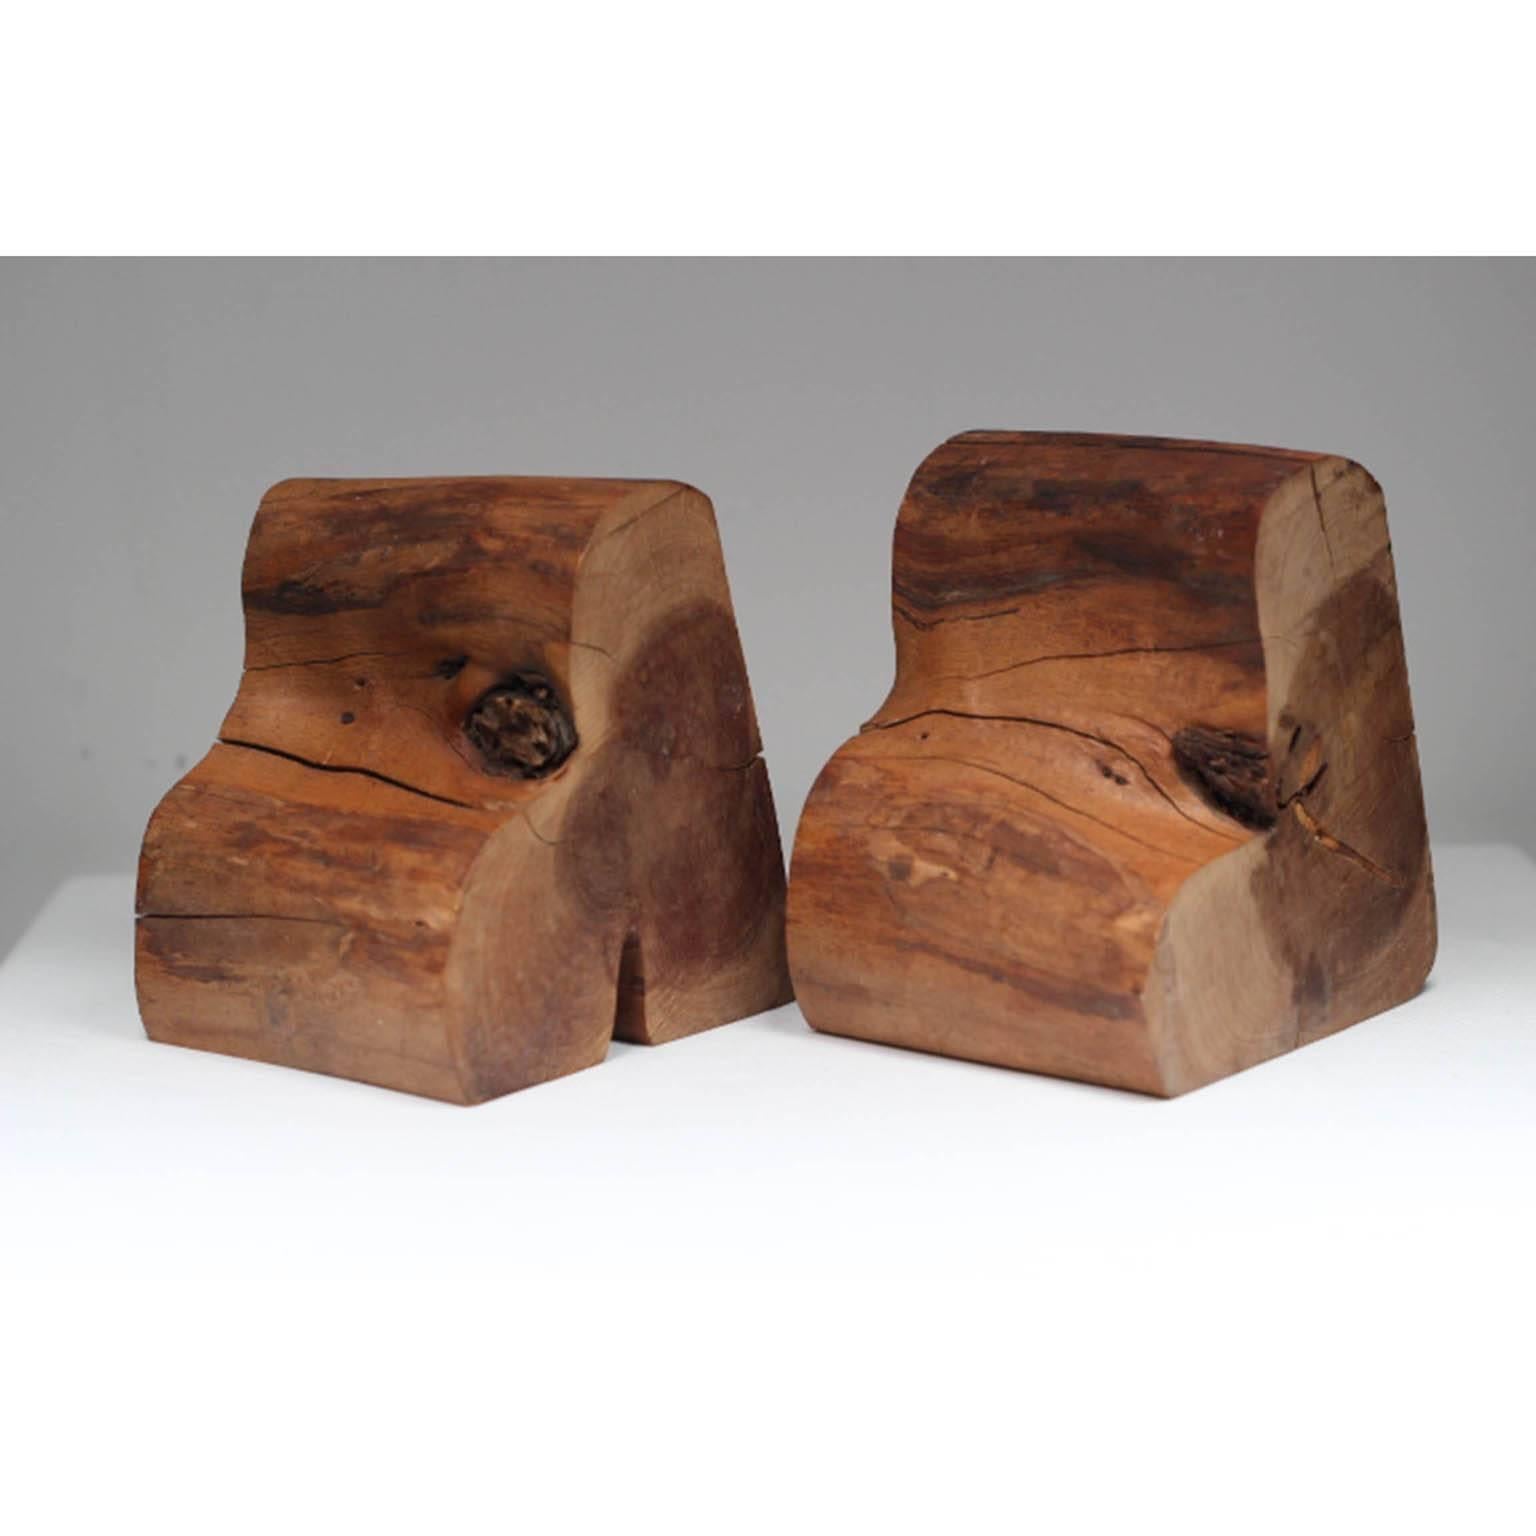 Beautiful carved wooden tree stump bookends.